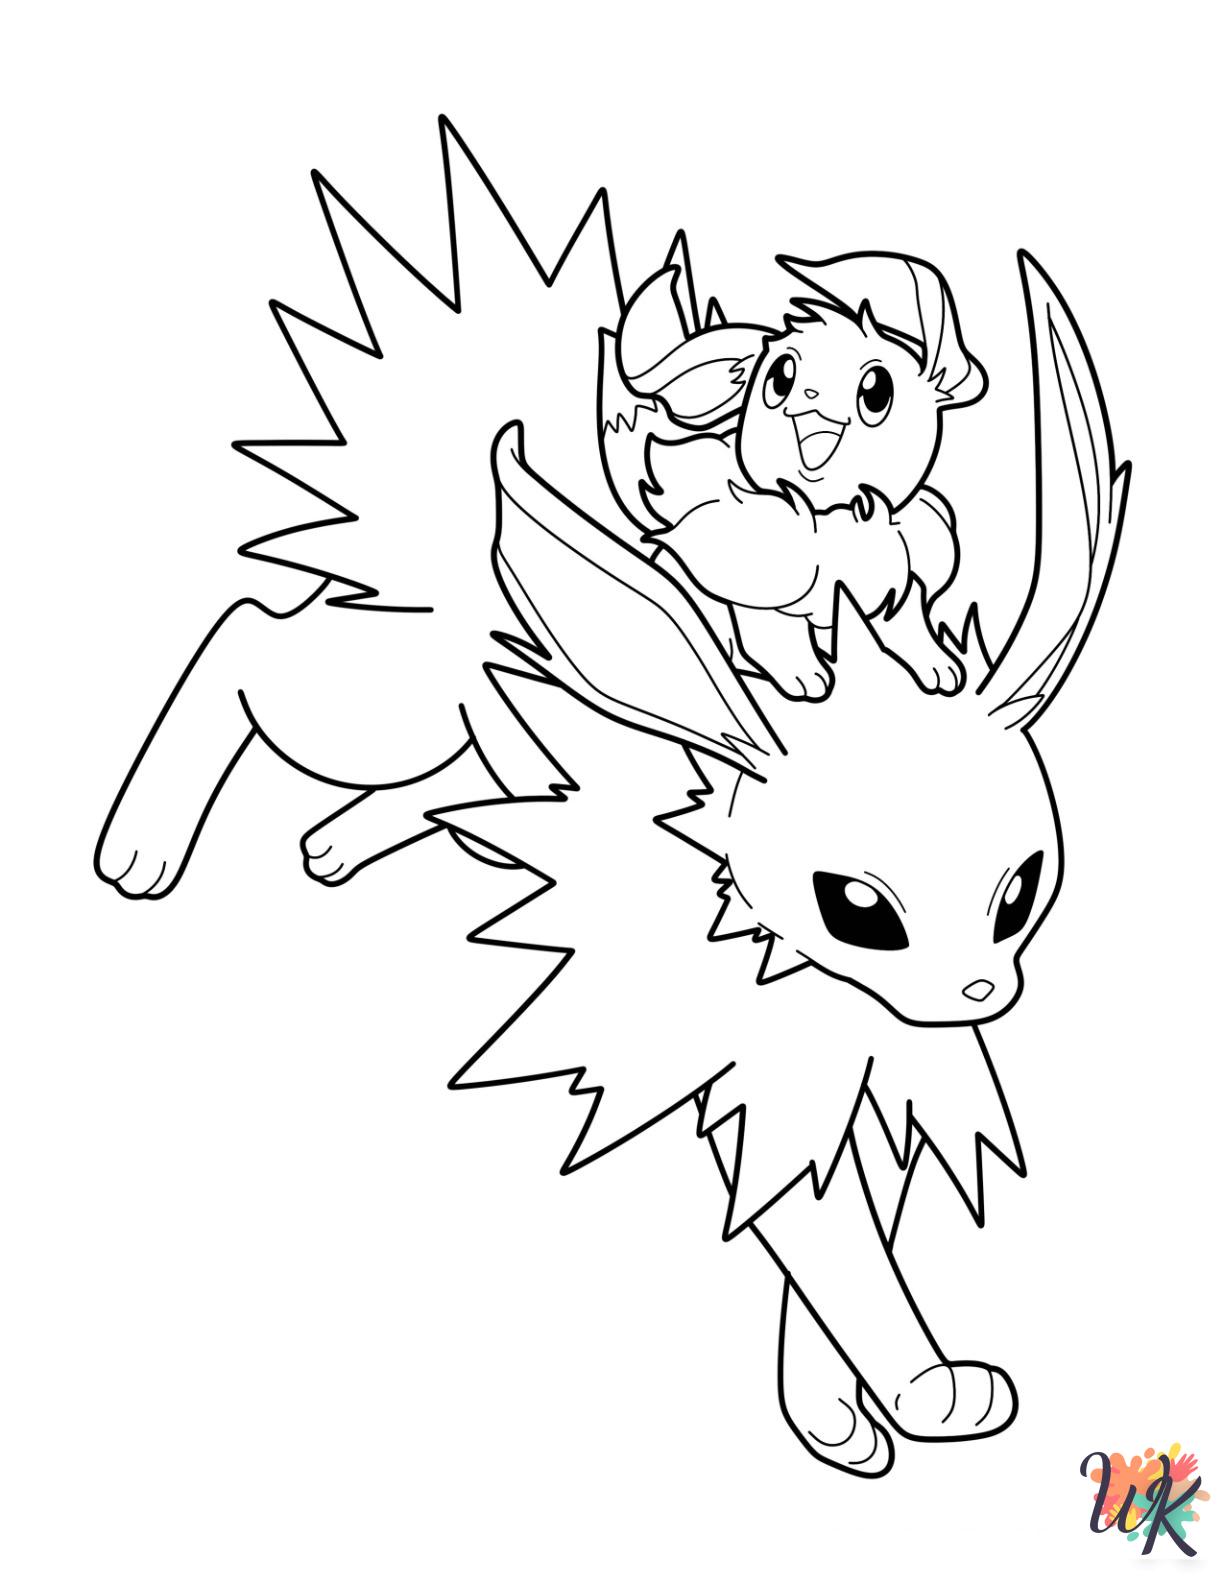 Jolteon free coloring pages